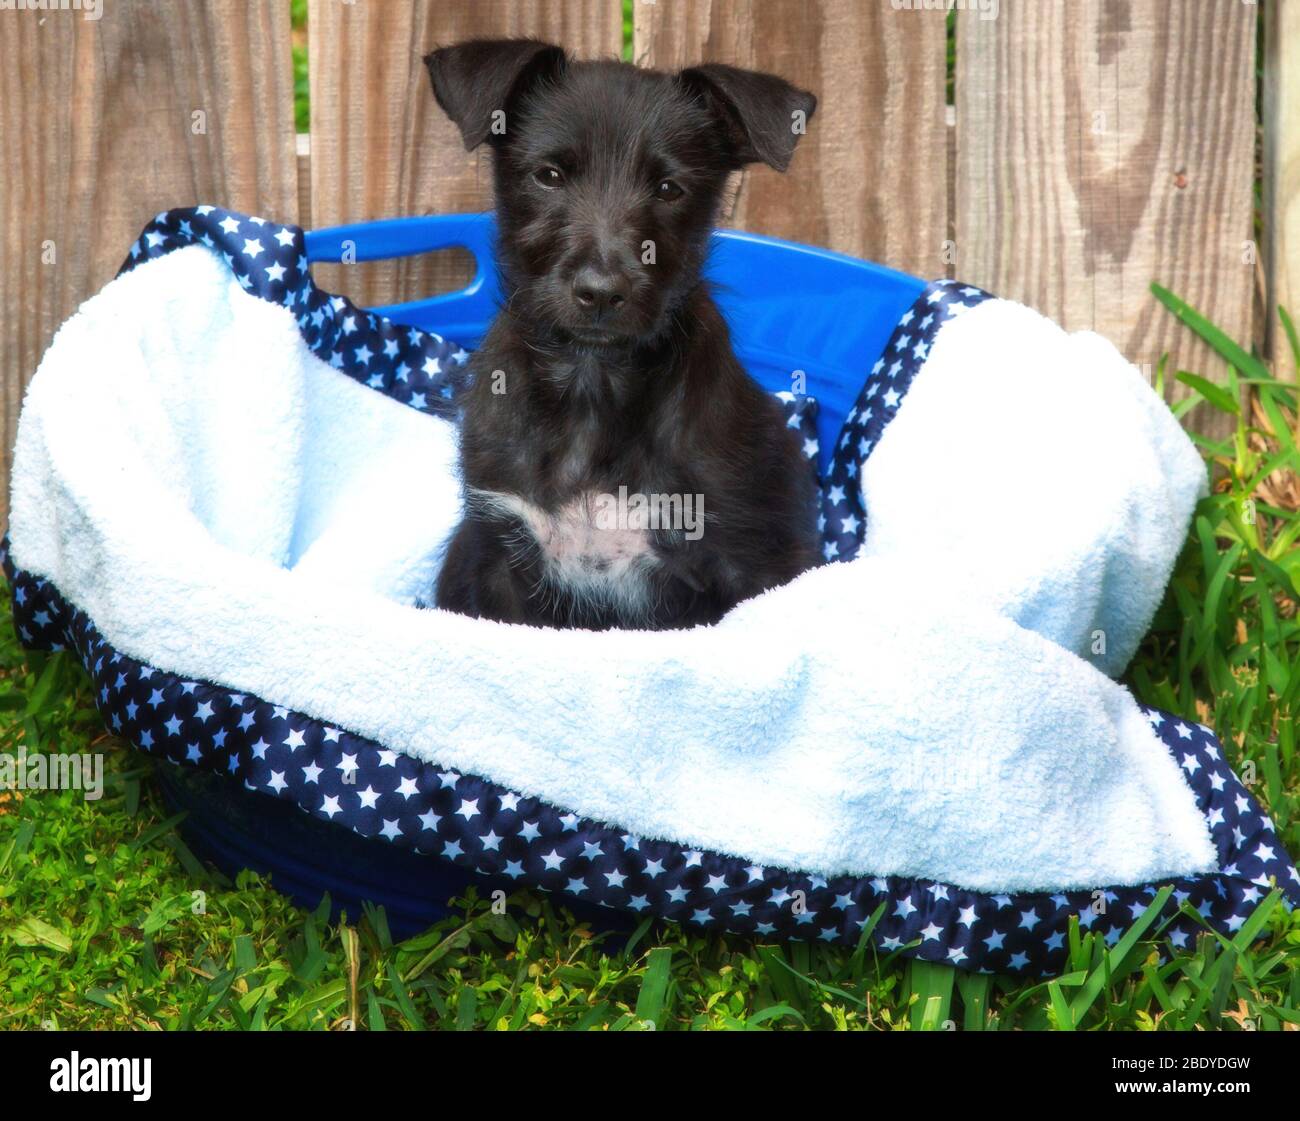 Cute, black mixed breed puppy in a basket in front of a wood fence Stock Photo